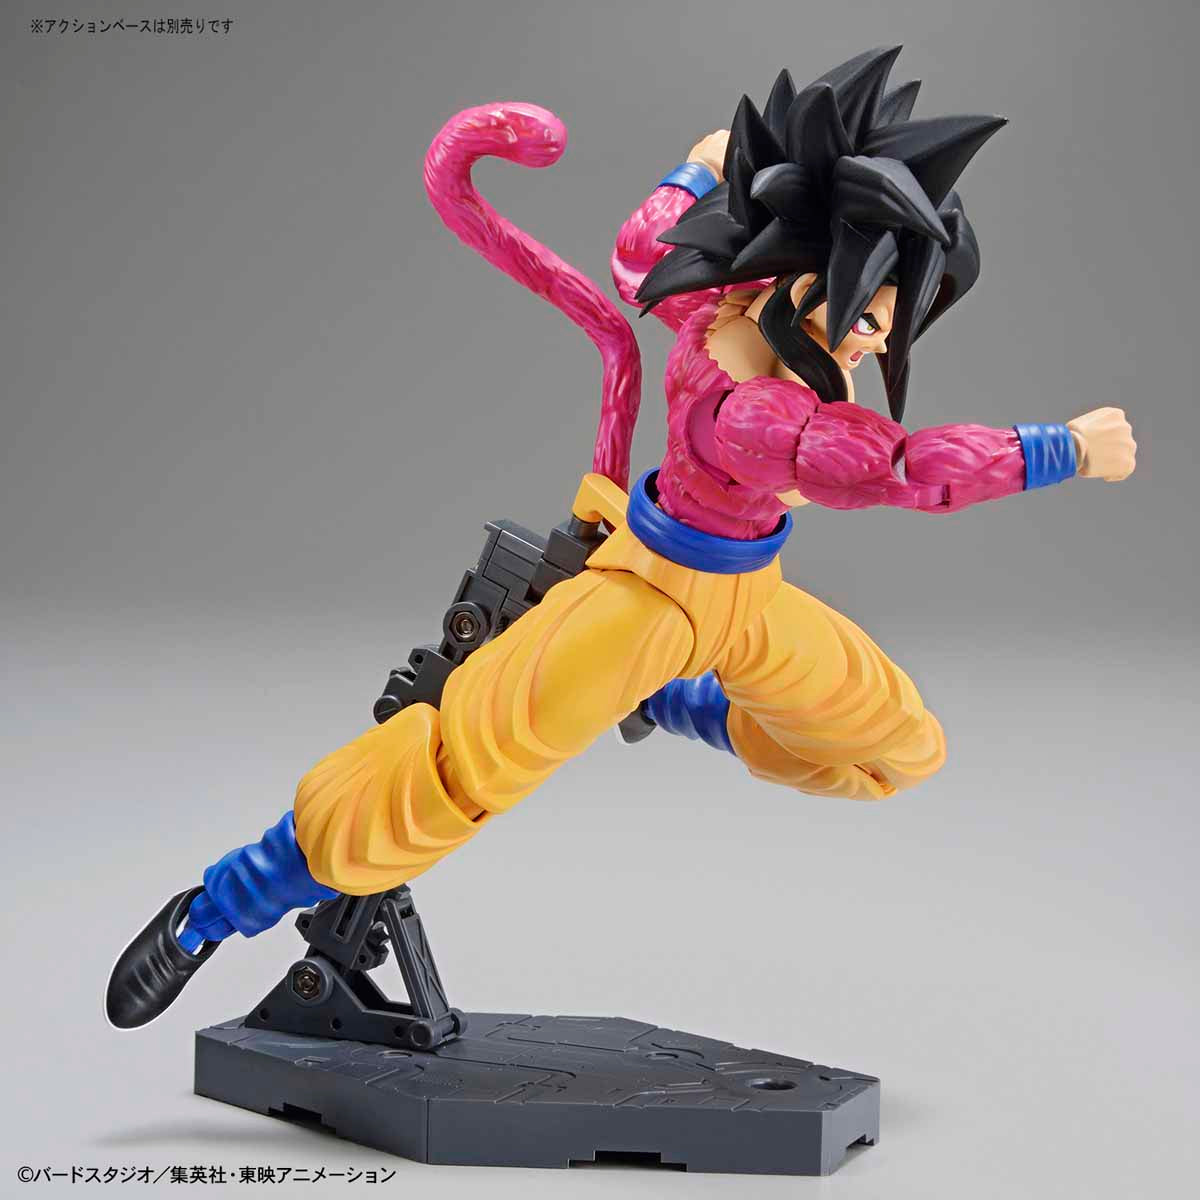 Dragon Ball - Super Saiyan 4 Son Goku - Figure-rise Standard Model Kit (Bandai), Includes Kamehameha effect parts, interchangeable angry expression parts, and more, Nippon Figures